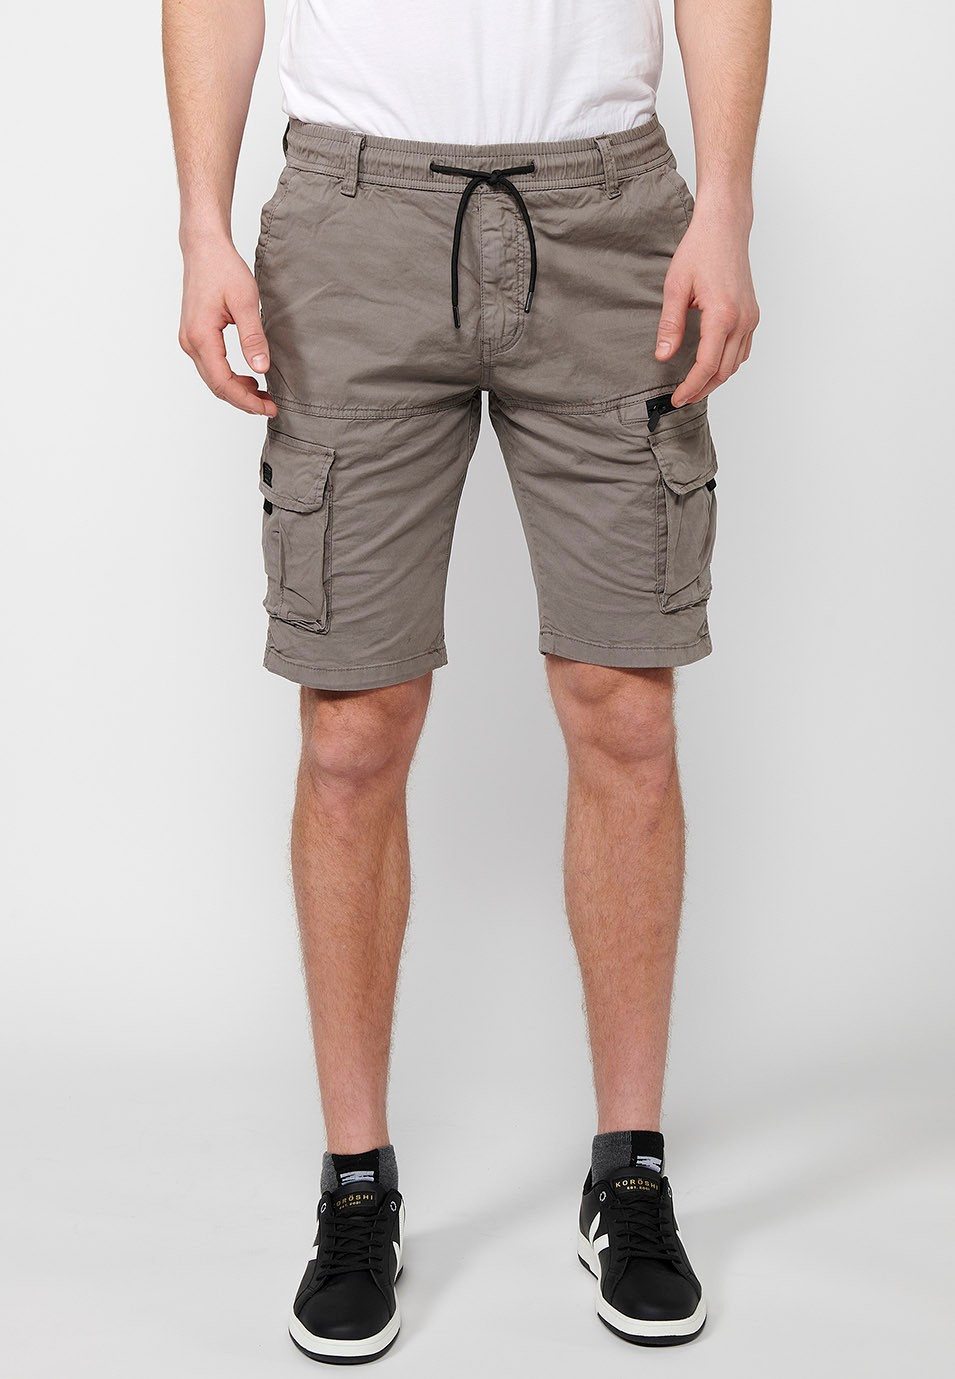 Cargo shorts with side pockets with flap and front closure with zipper and button Taupe Color for Men 2